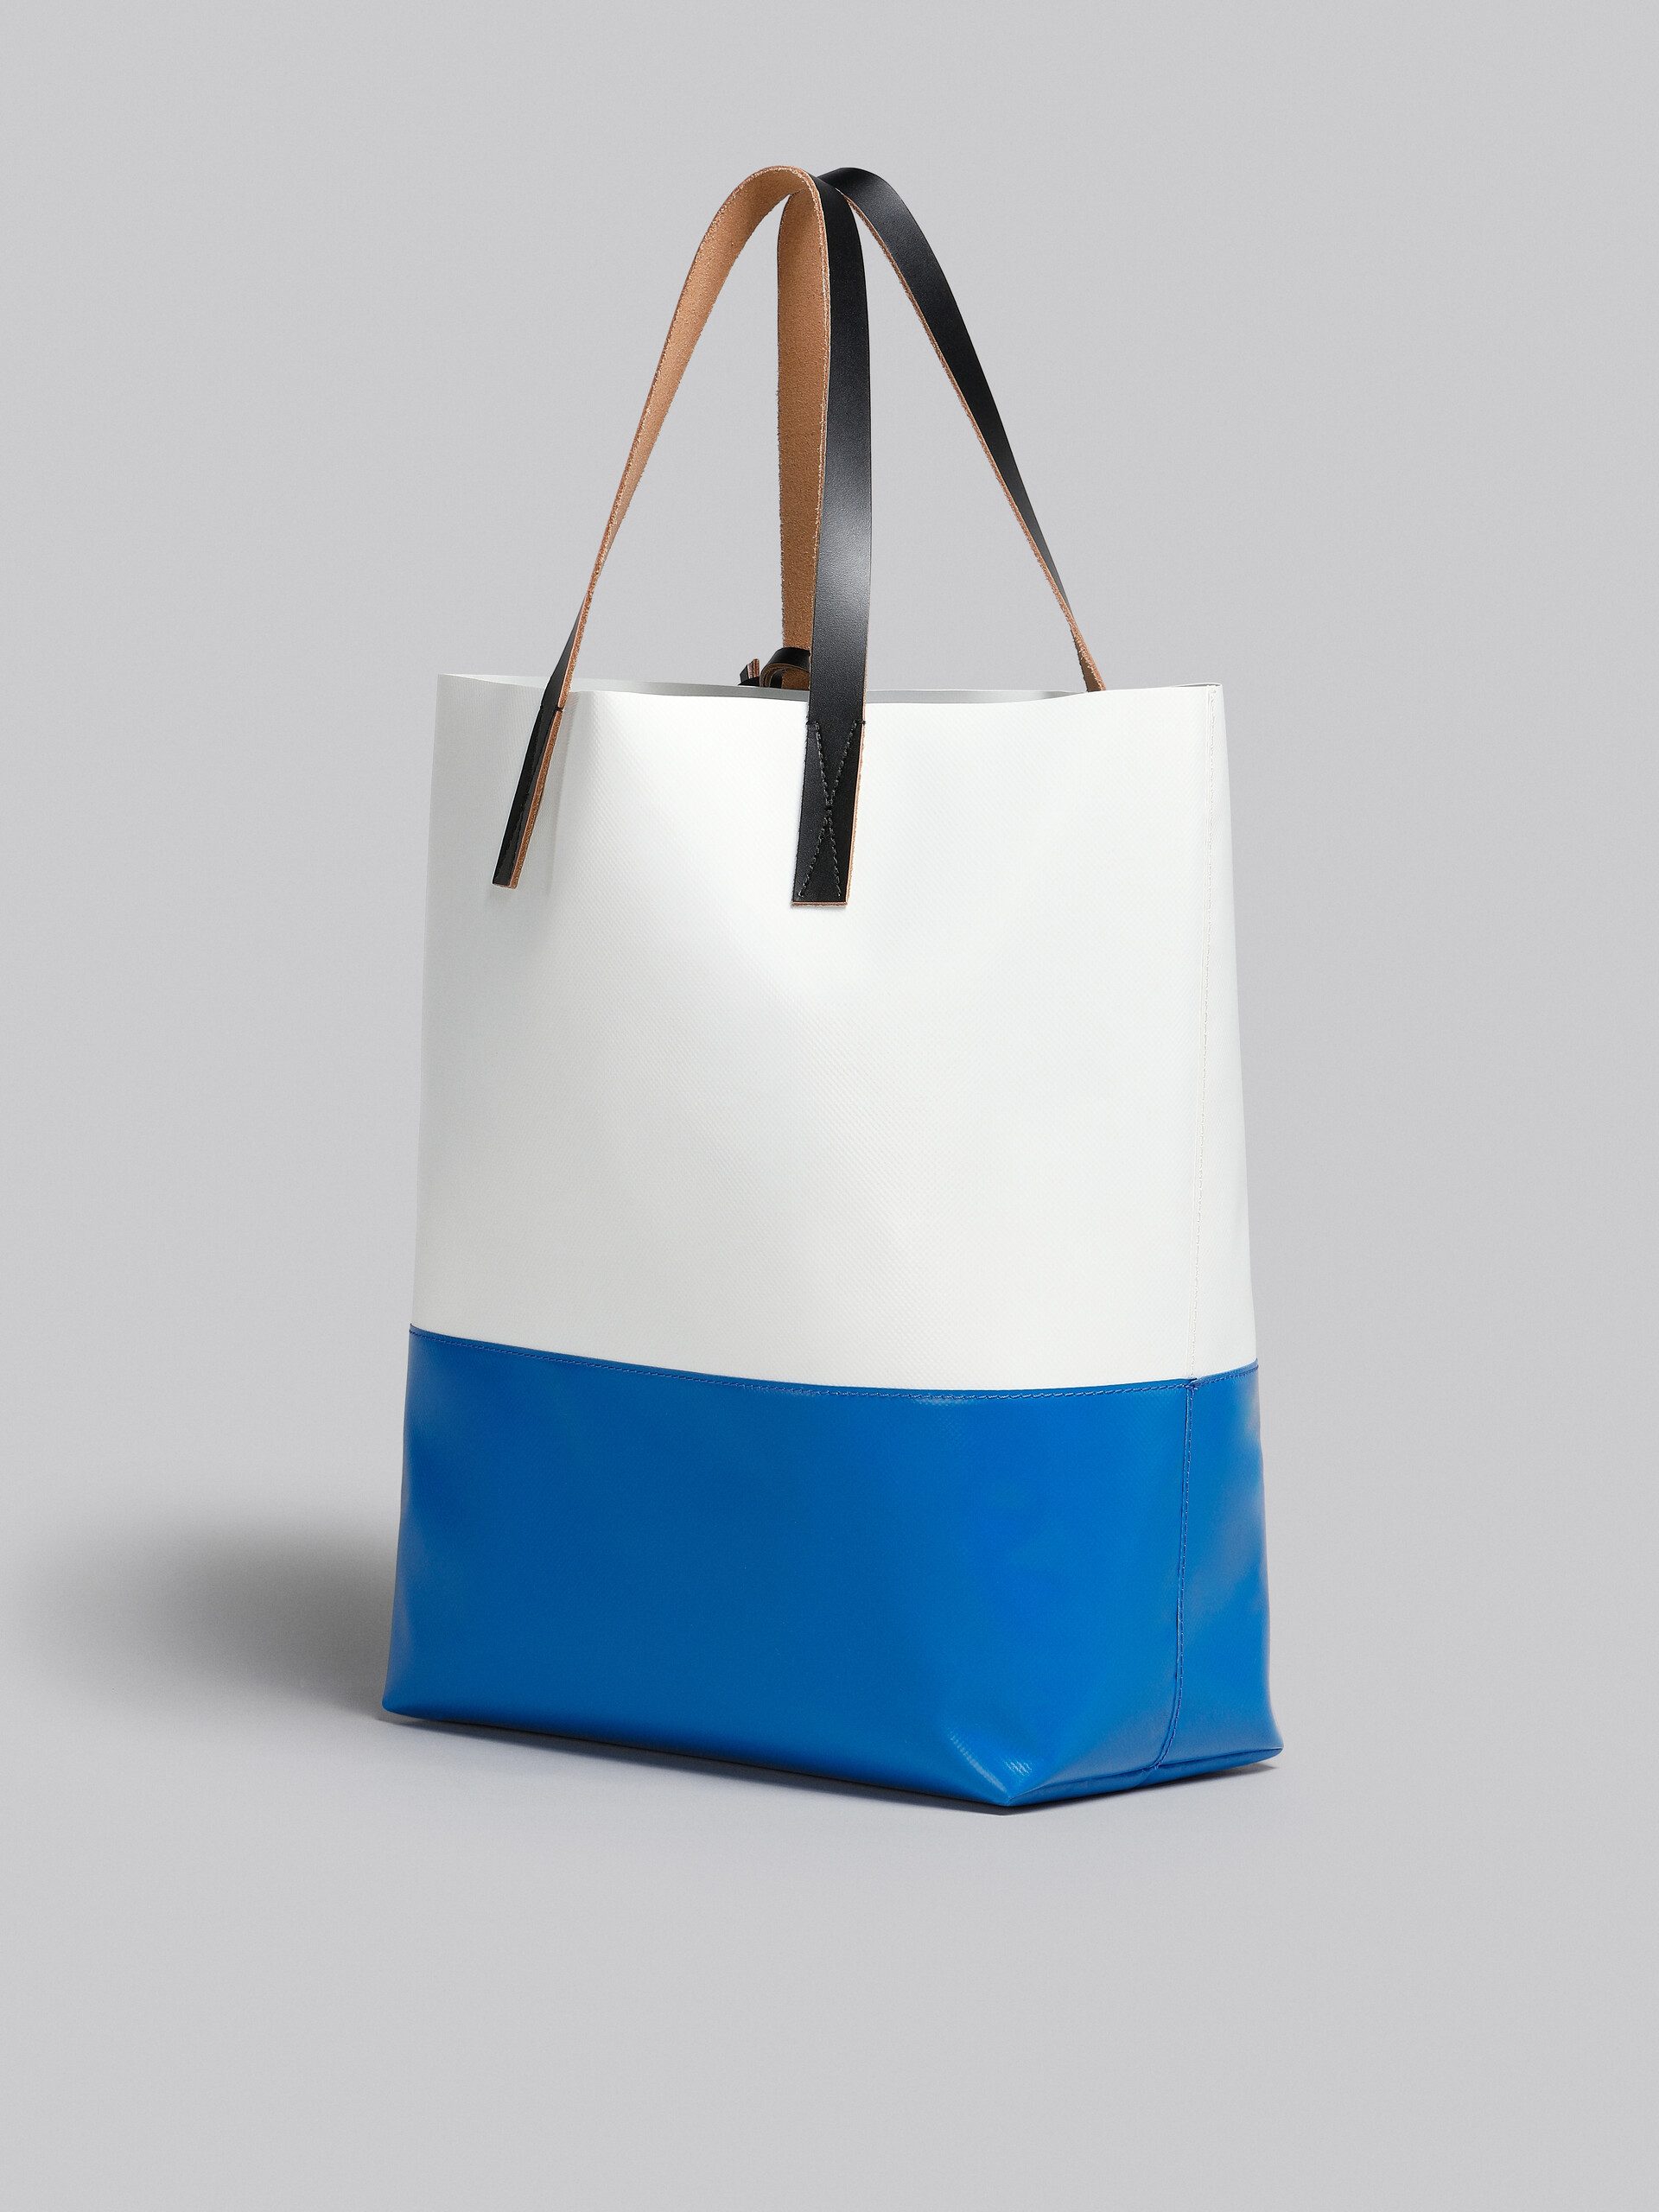 Tribeca shopping bag in white and blue - Shopping Bags - Image 3